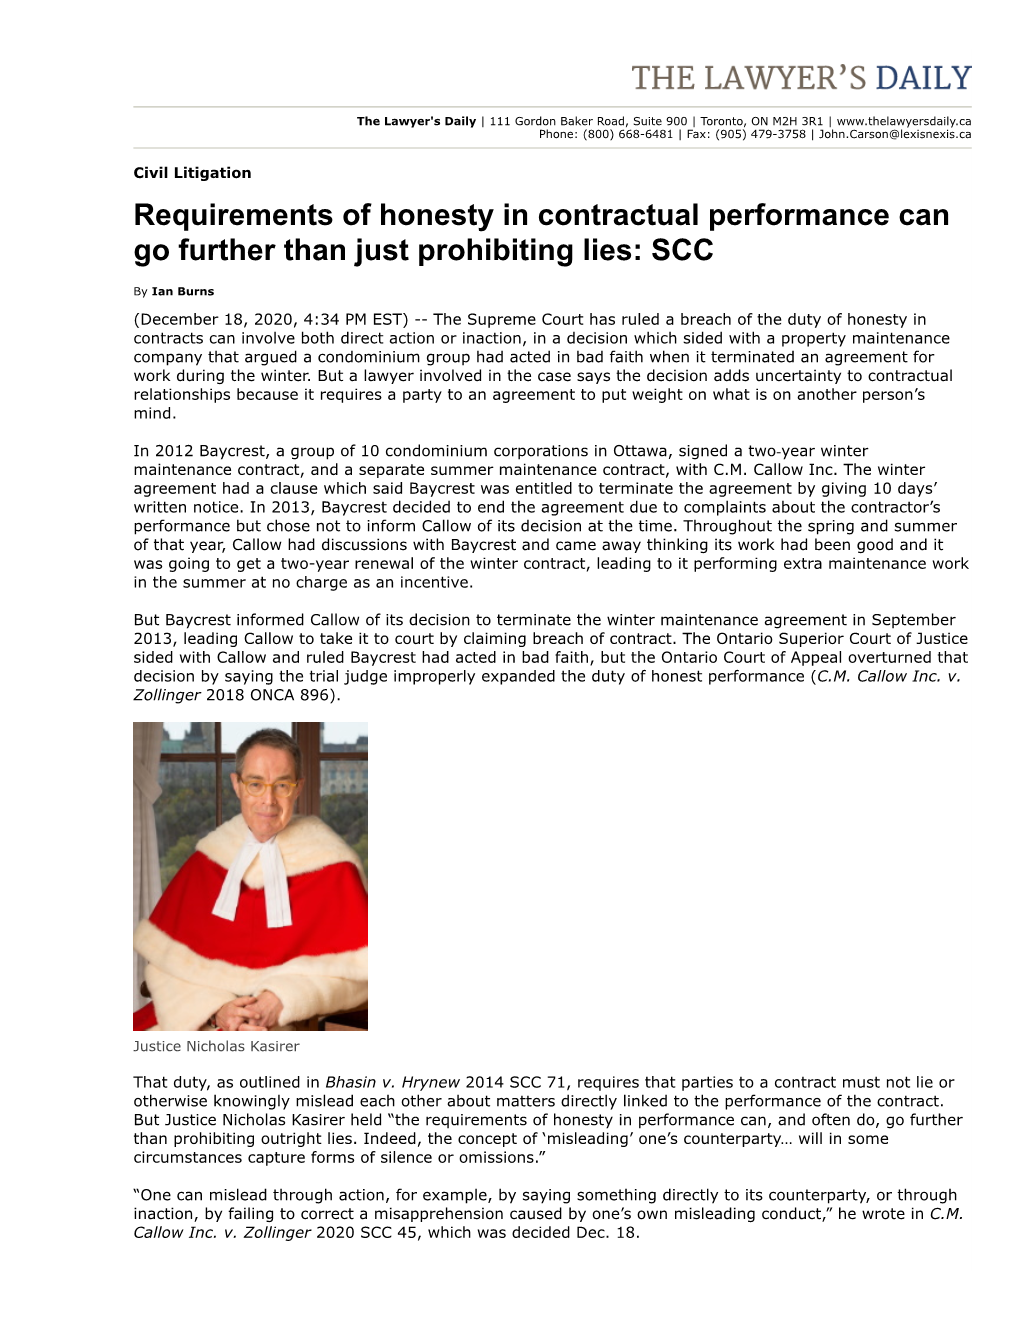 Requirement of Honesty in Contractual Performance